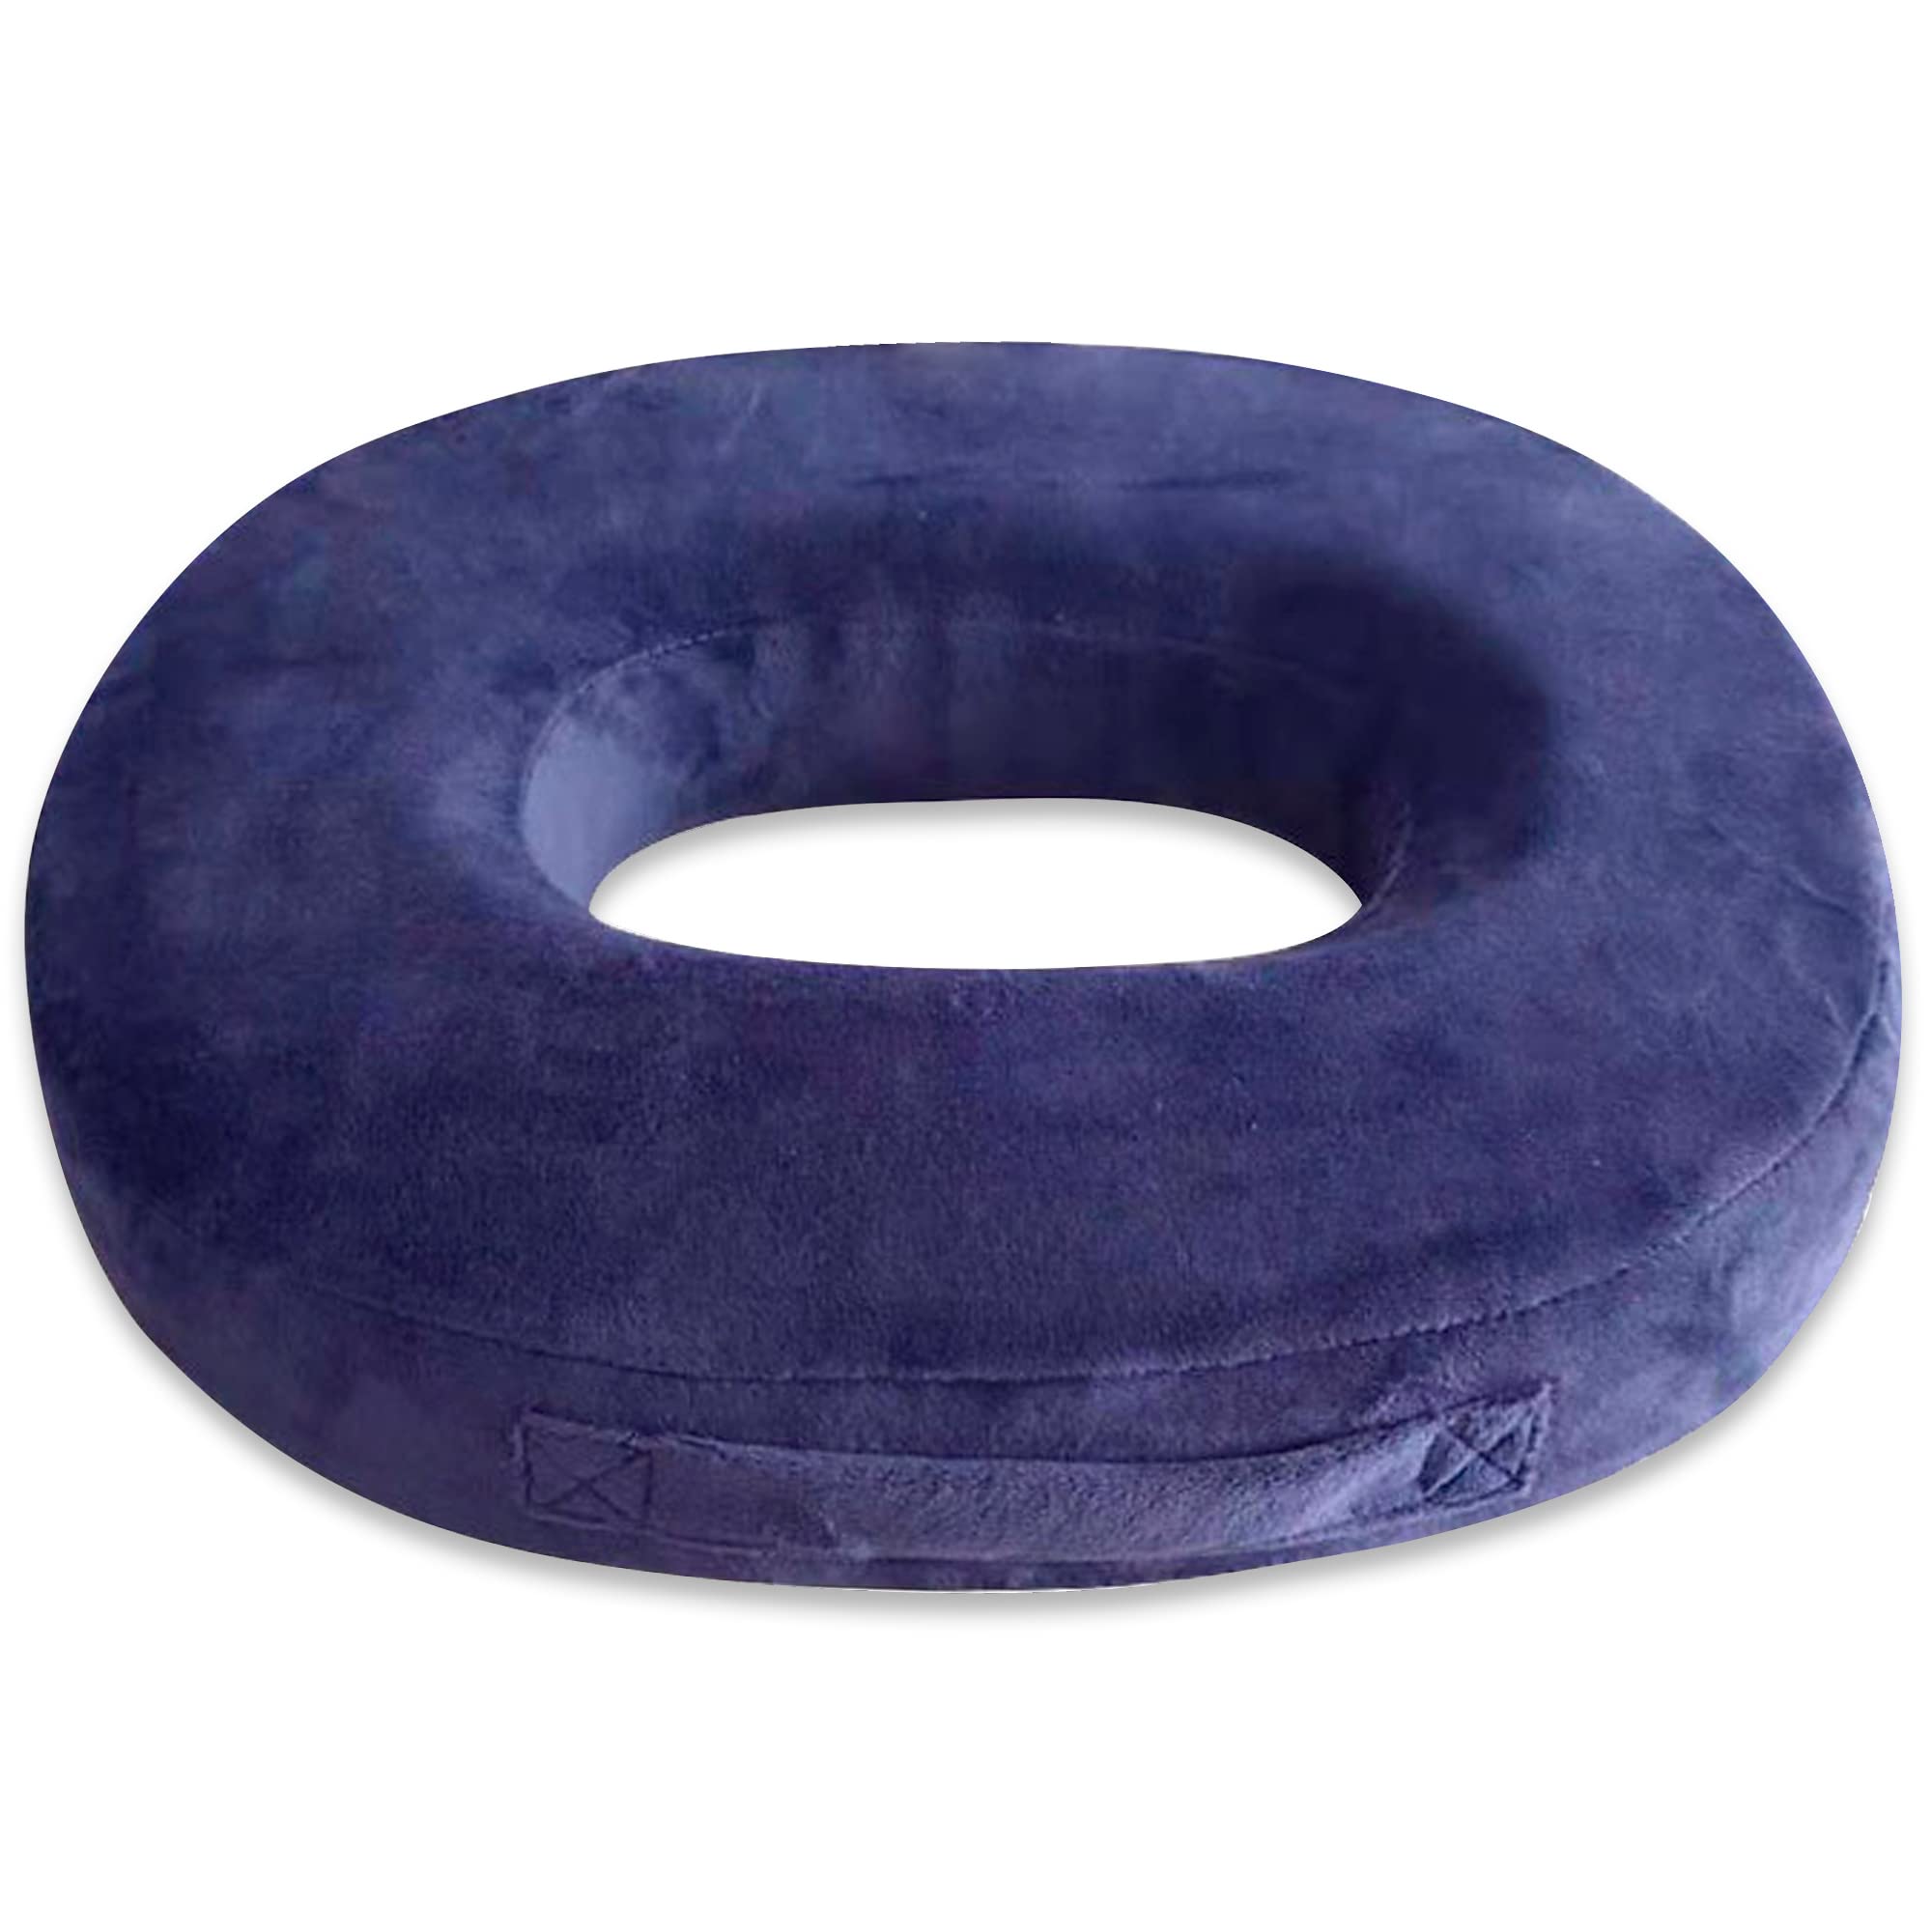 https://japanwithlovestore.com/cdn/shop/products/2023-Edition-Supervised-By-Active-Midwives-Conical-Cushion-Postpartum-Hemorrhoids-Episiotomy-Waist-High-Resilience-ScratchFriendly-Donut-Cushion-Portable-Navy-Japan-Figure-45956449430.jpg?v=1691653415